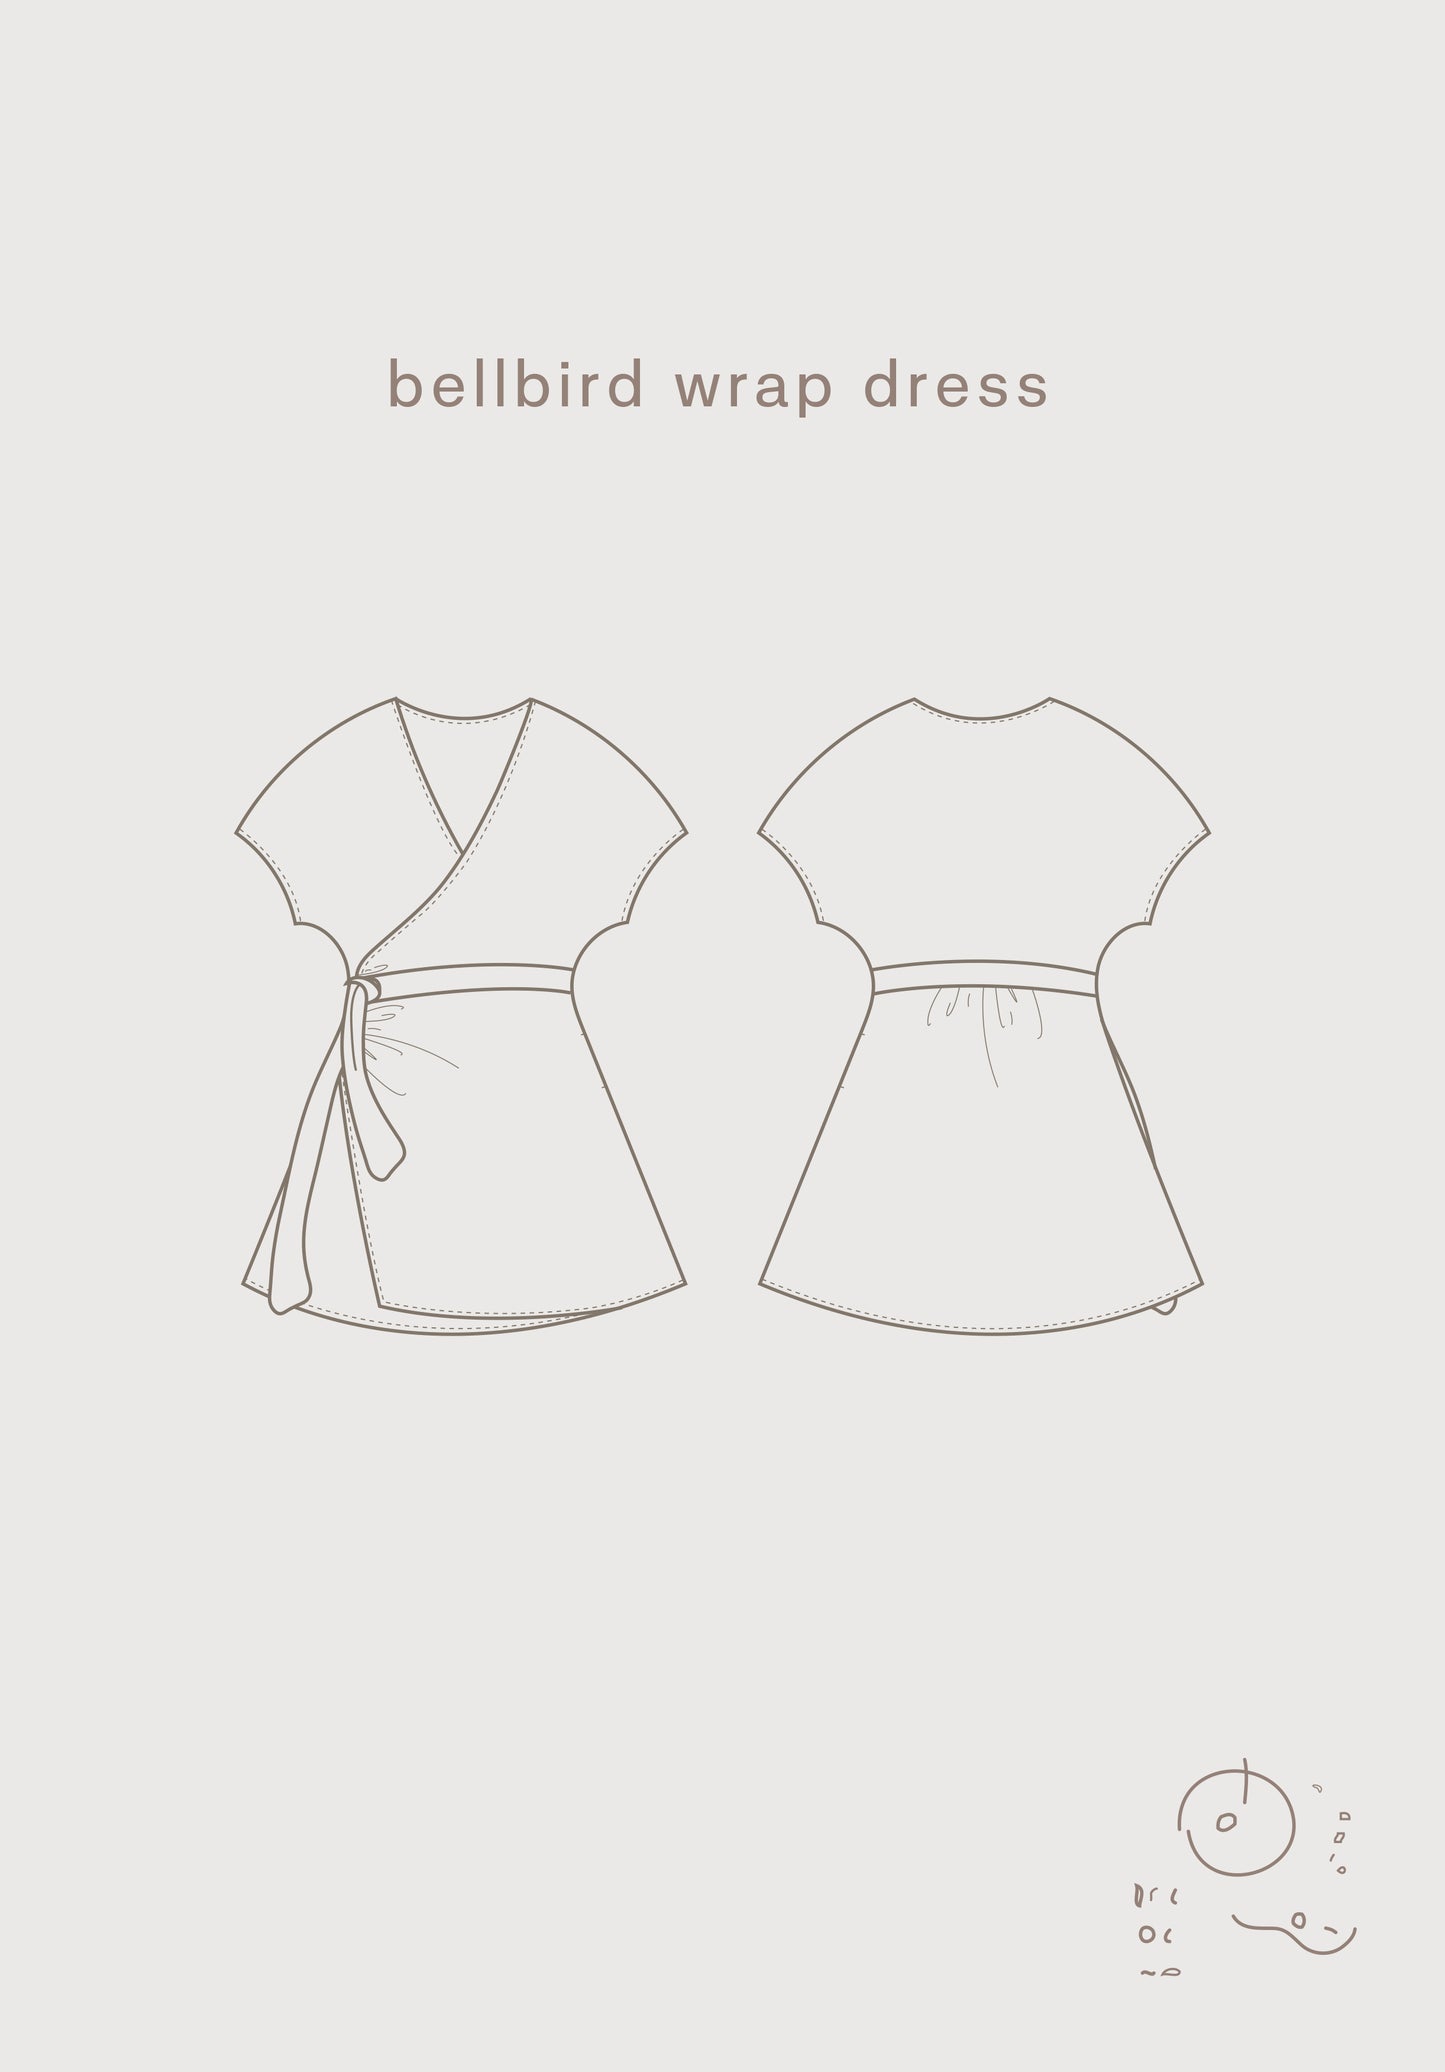 Common Stitch Bellbird Wrap Dress and Top (Paper Pattern)